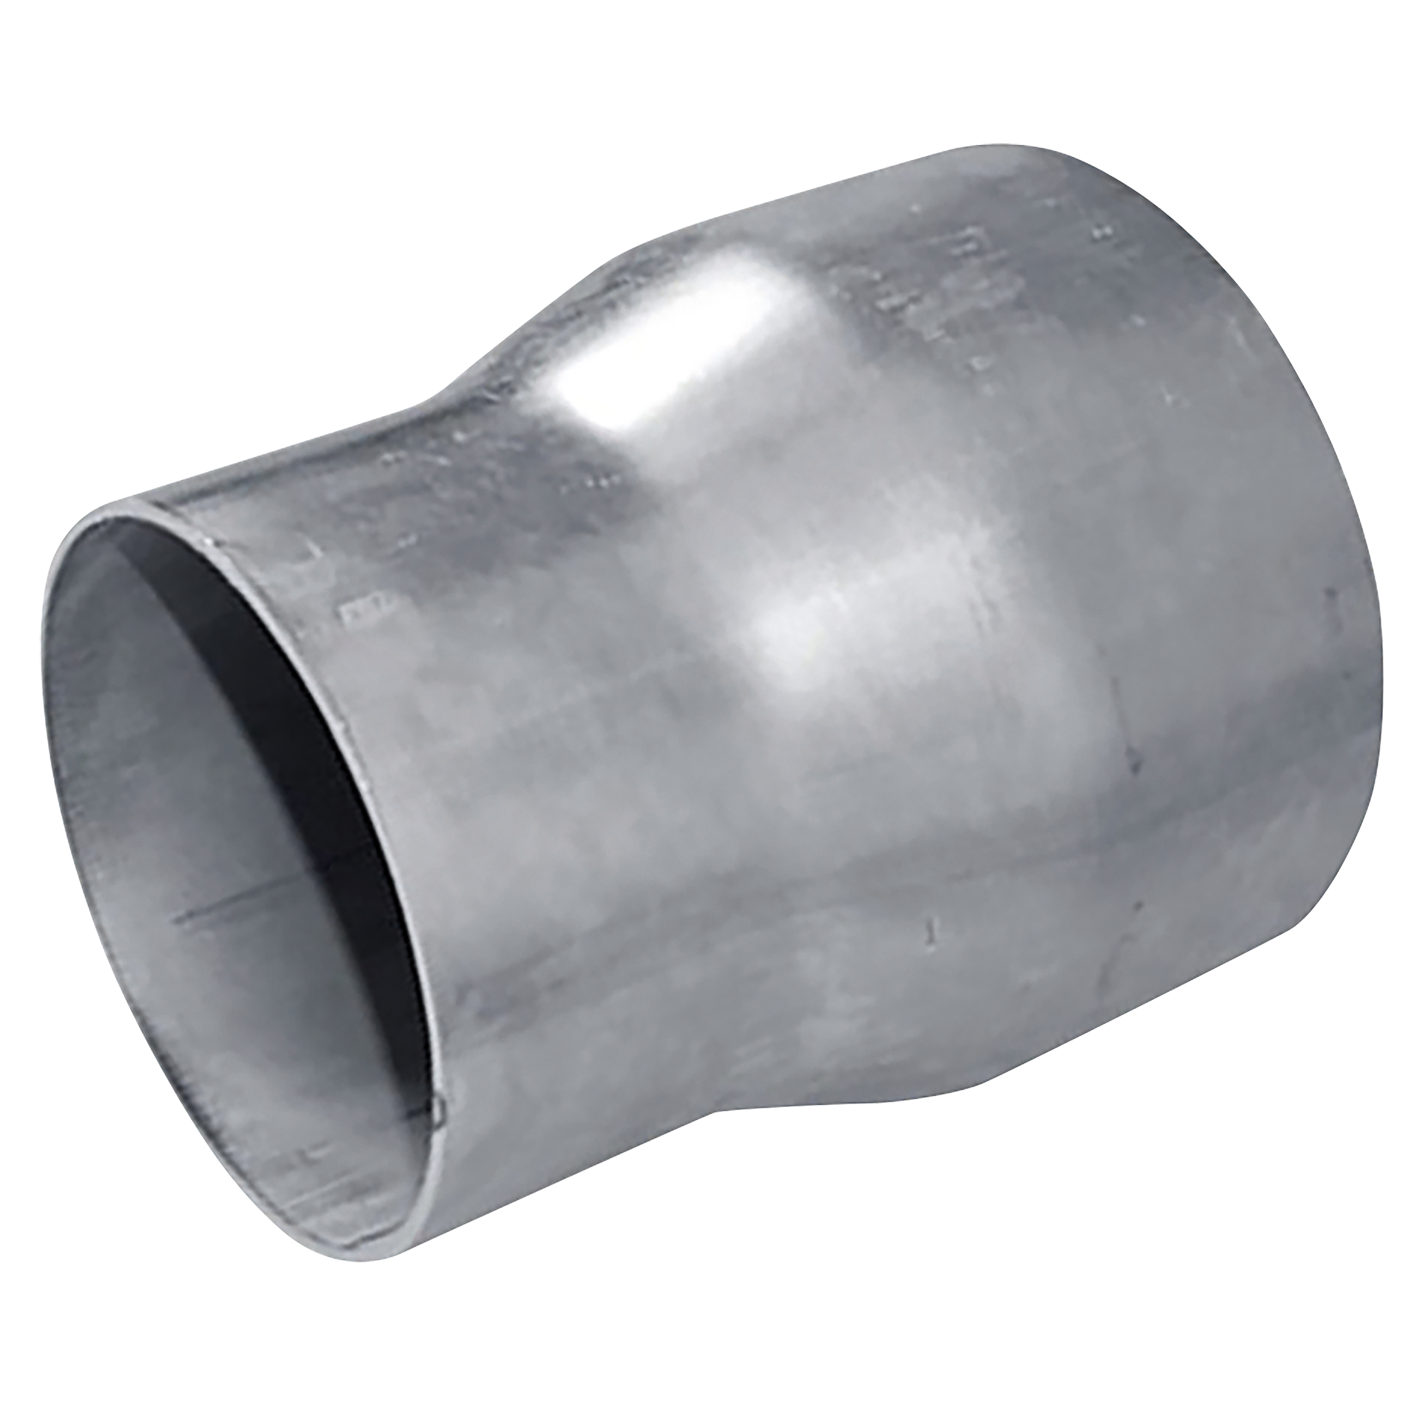 STEEL REDUCING CONE 127MM-108MM OD